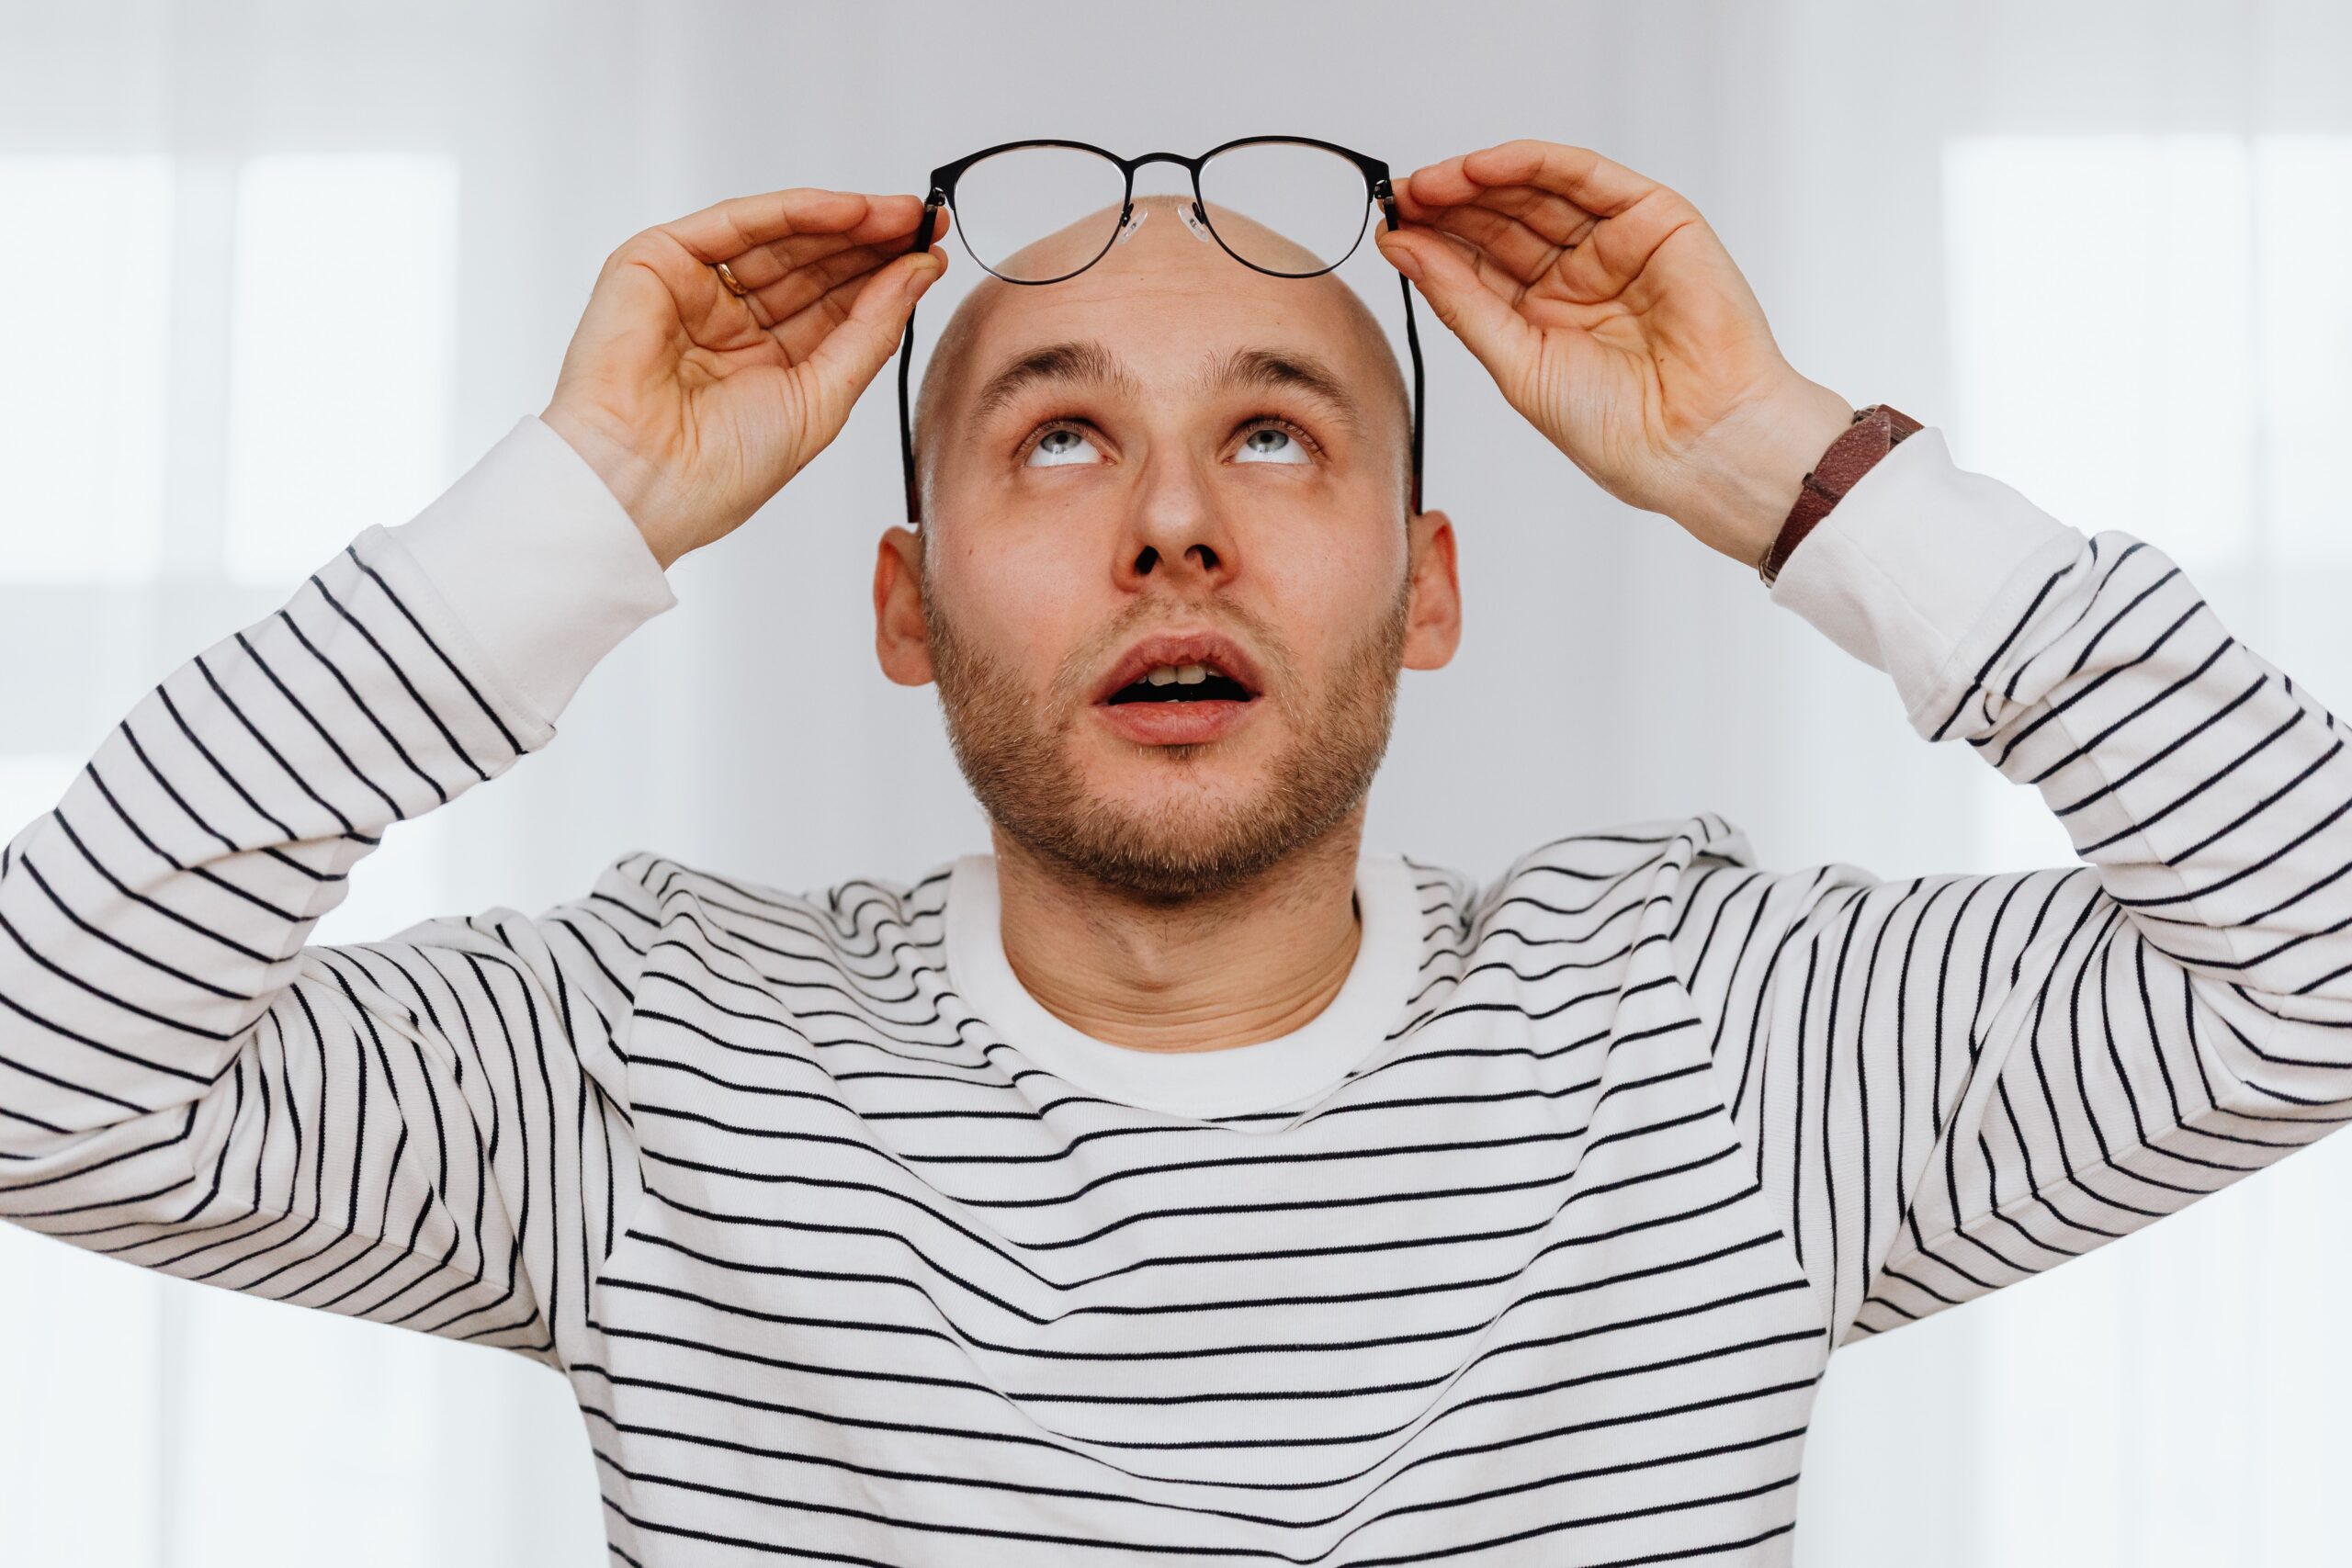 A bald man is looking carefully at his eyeglasses as he holds them above his head